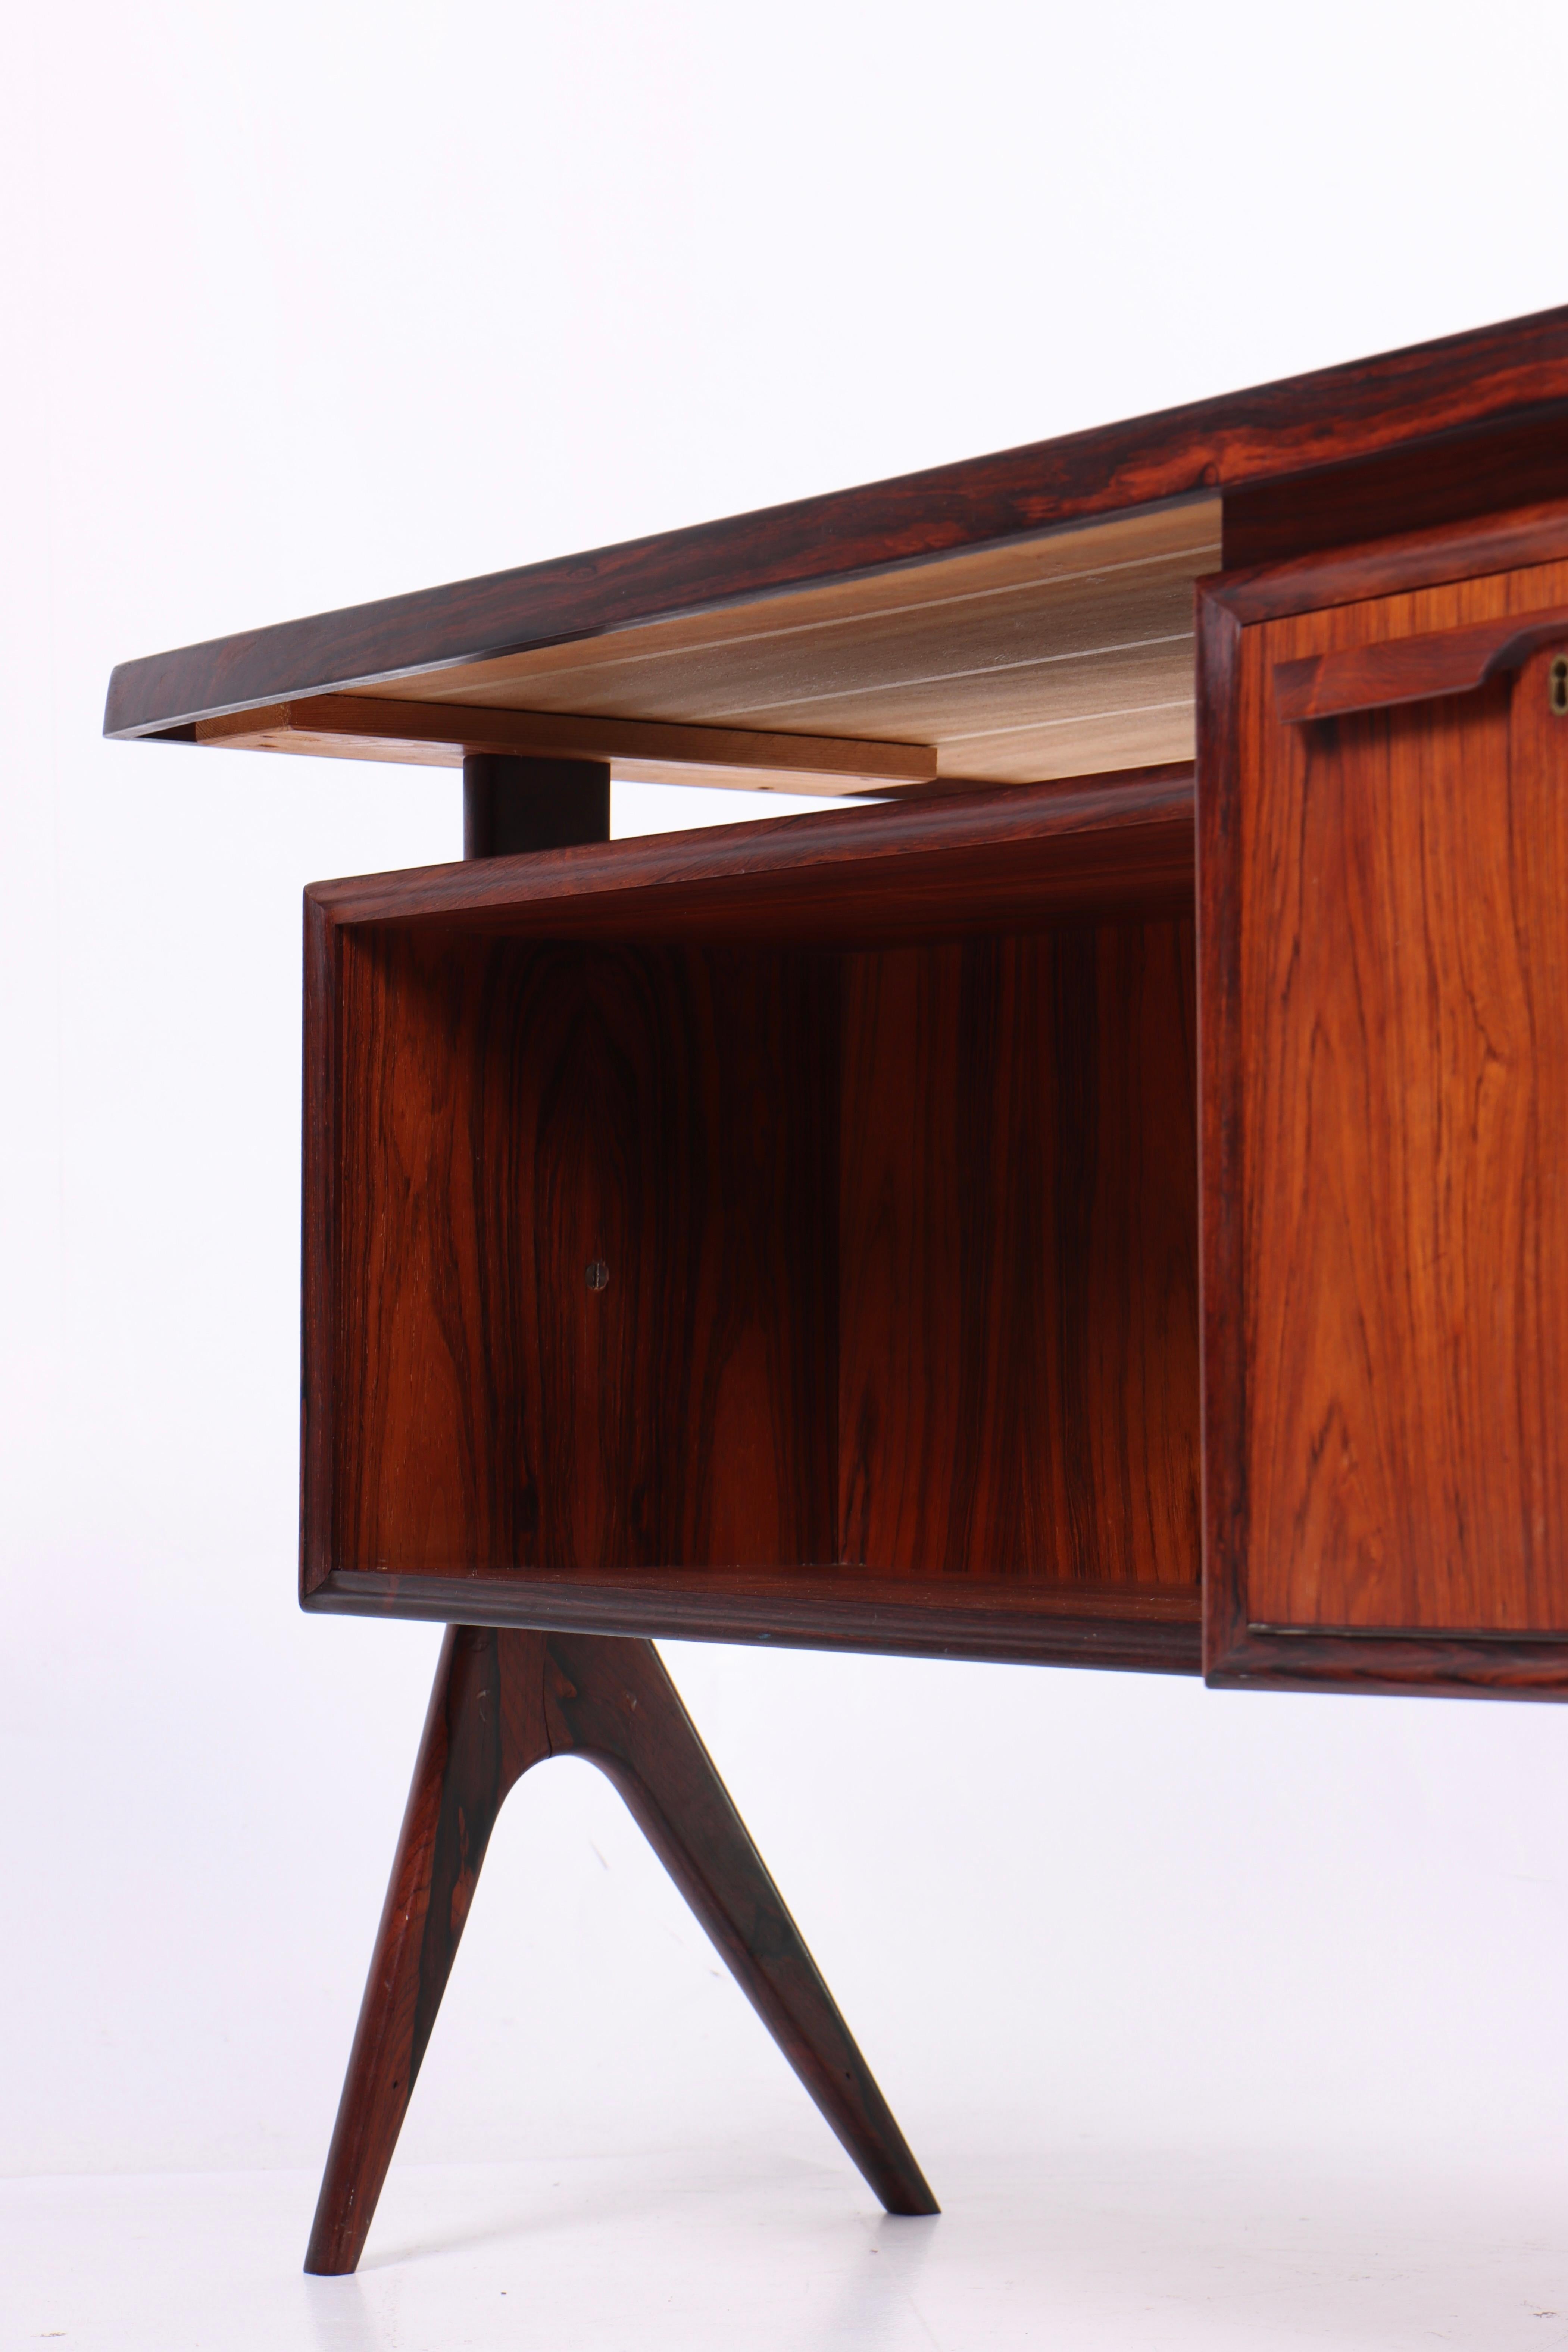 Midcentury Desk in Rosewood, Made in Denmark 1960s For Sale 7